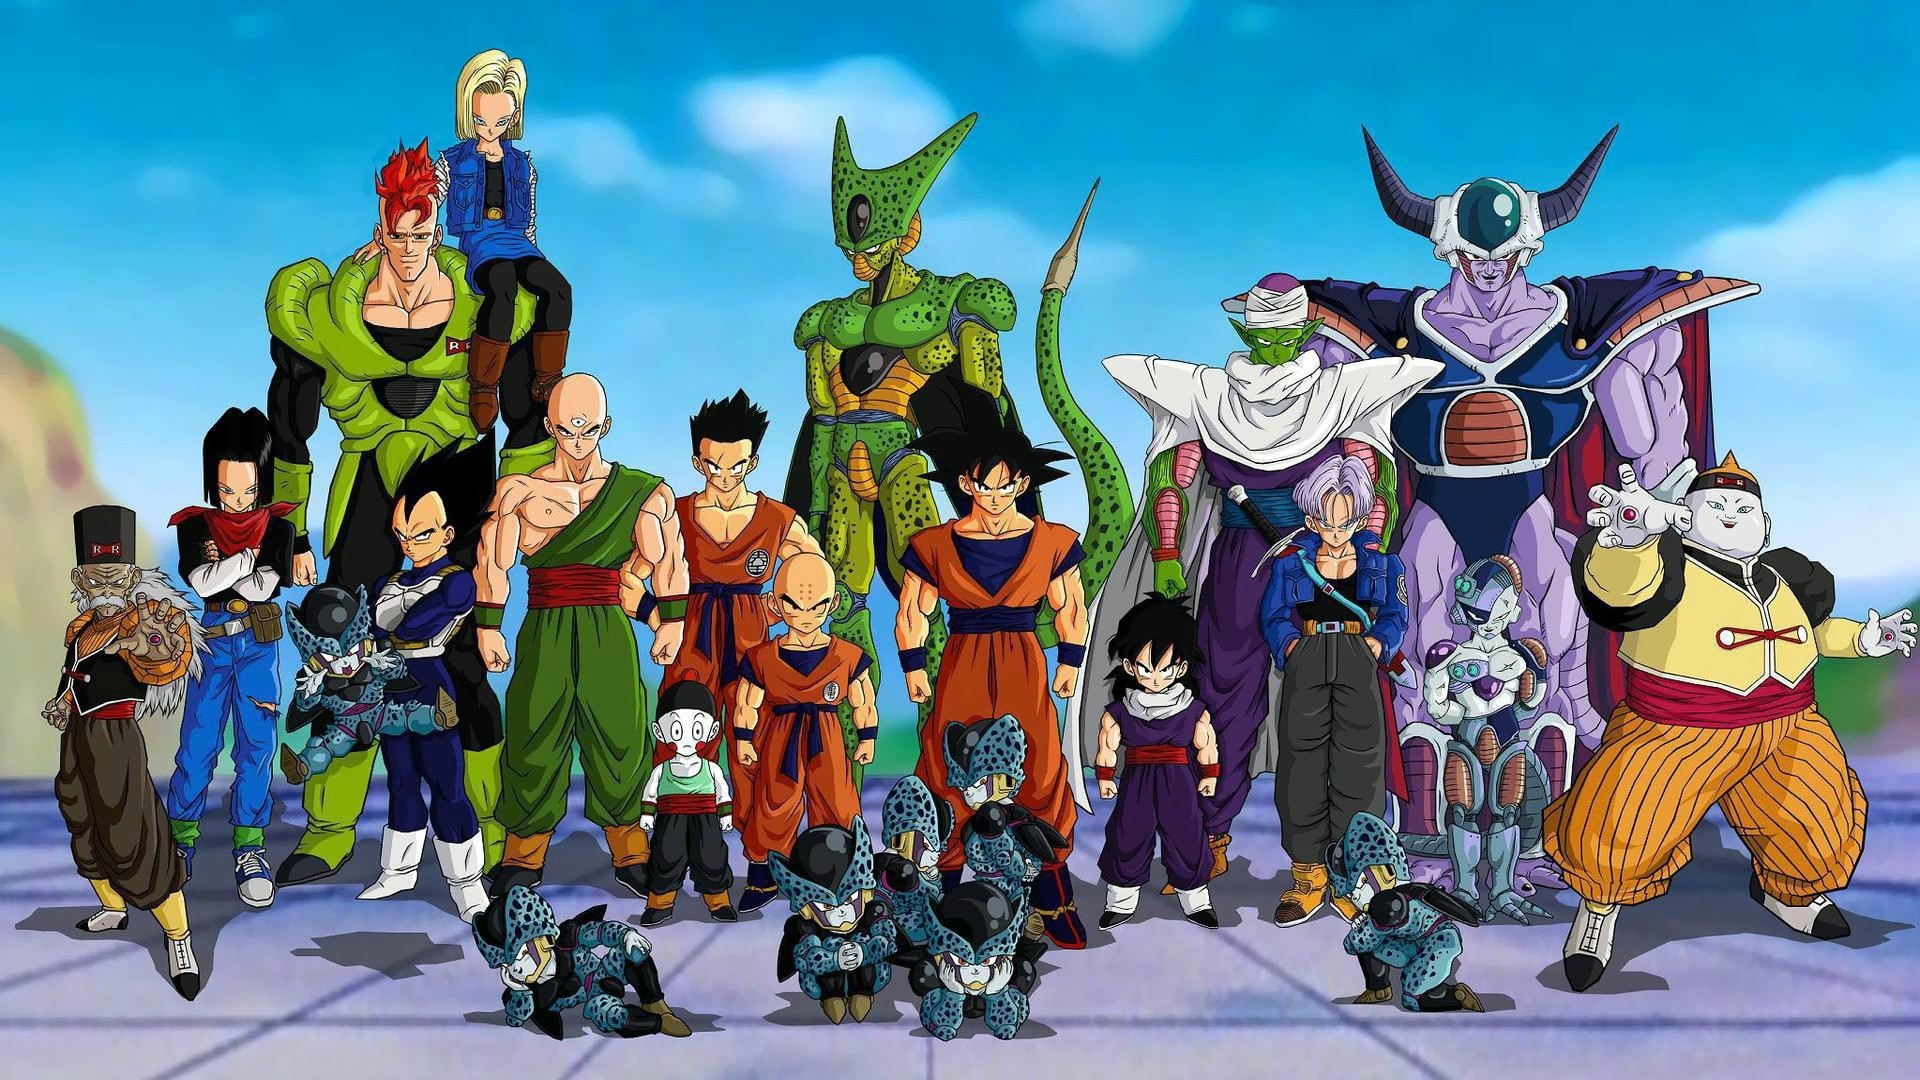 Dragon Ball, Cell (character), Trunks (character), Vegeta, Gohan, Krillin, Android 17, Android 18, Tien Shinhan, Dr. Gero, Android 19, Piccolo, Mecha Frieza, Chiaotzu Wallpaper